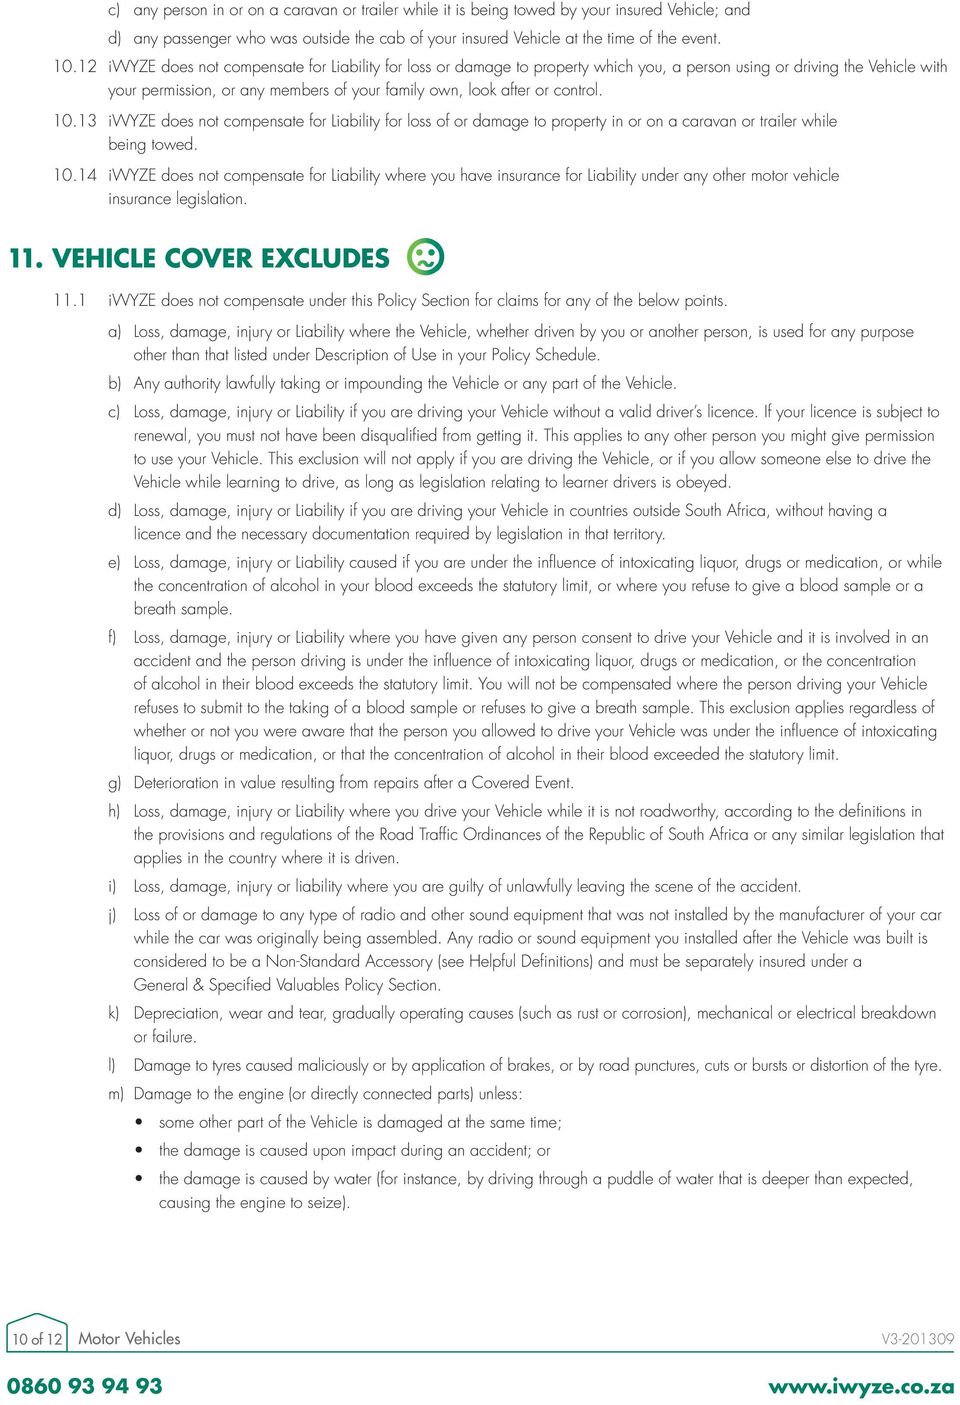 control. 10.13 iwyze does not compensate for Liability for loss of or damage to property in or on a caravan or trailer while being towed. 10.14 iwyze does not compensate for Liability where you have insurance for Liability under any other motor vehicle insurance legislation.